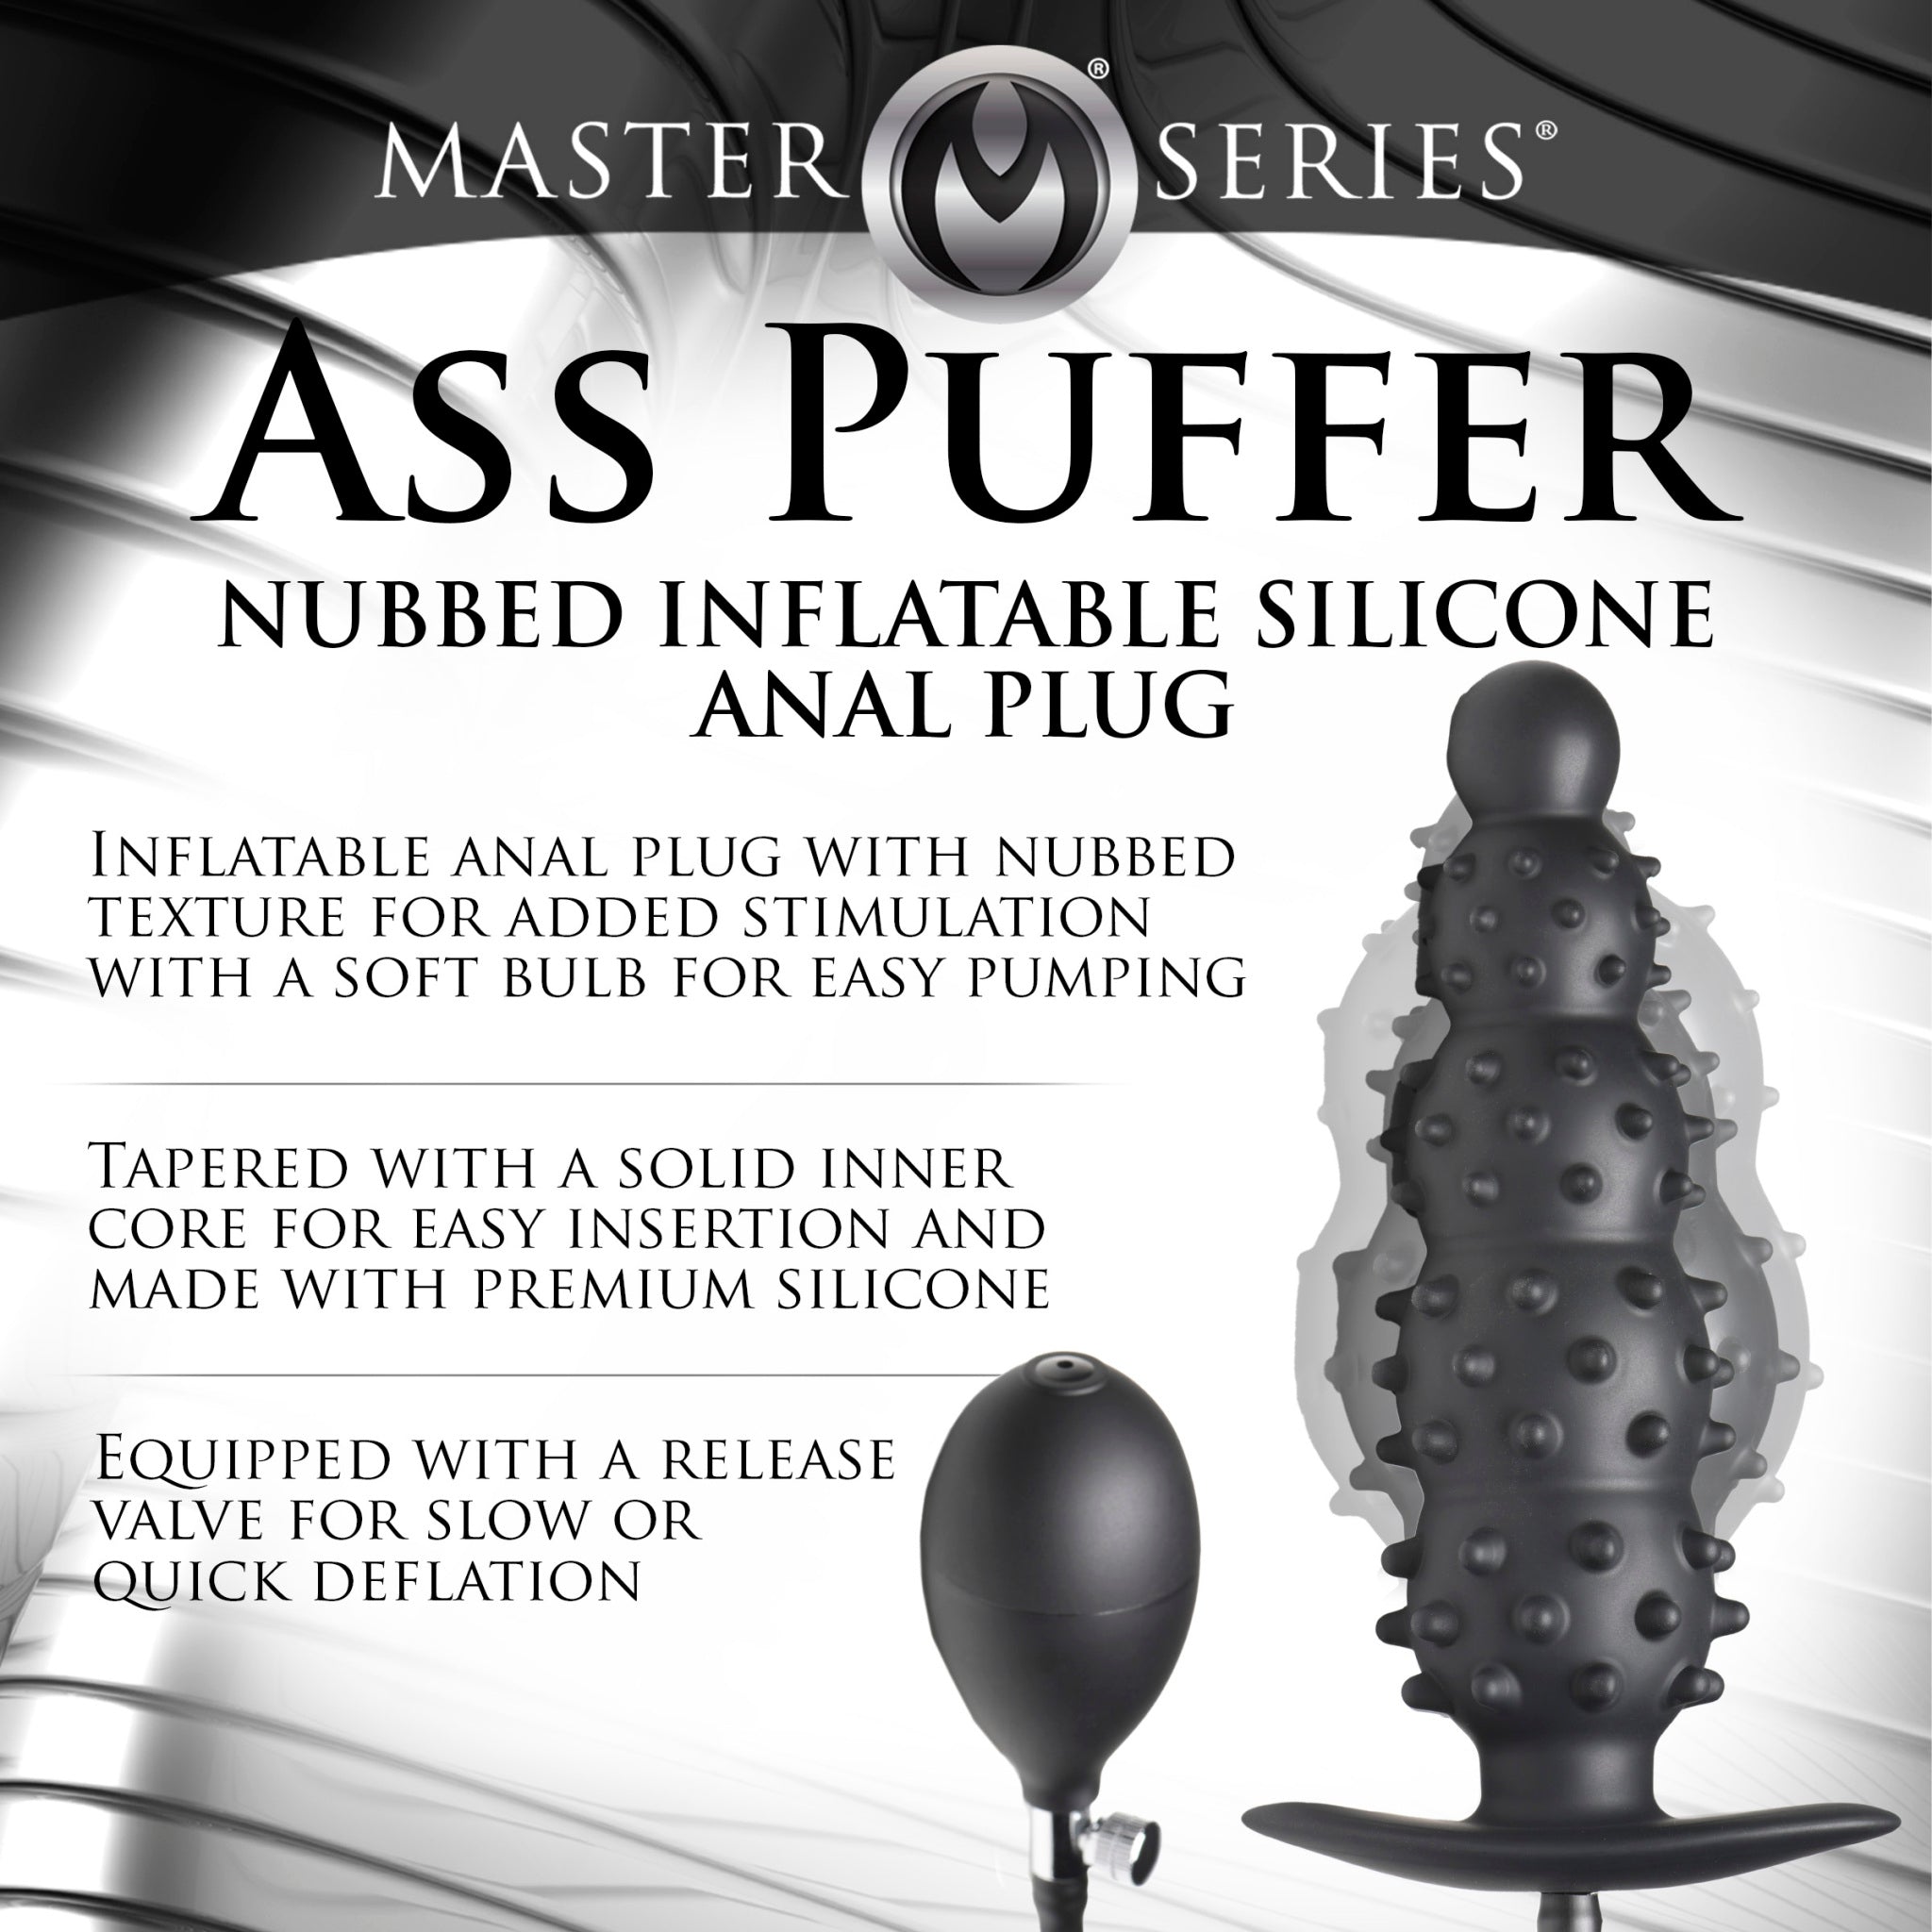 Master Series Ass Puffer Nubbed Inflatable Anal Plug